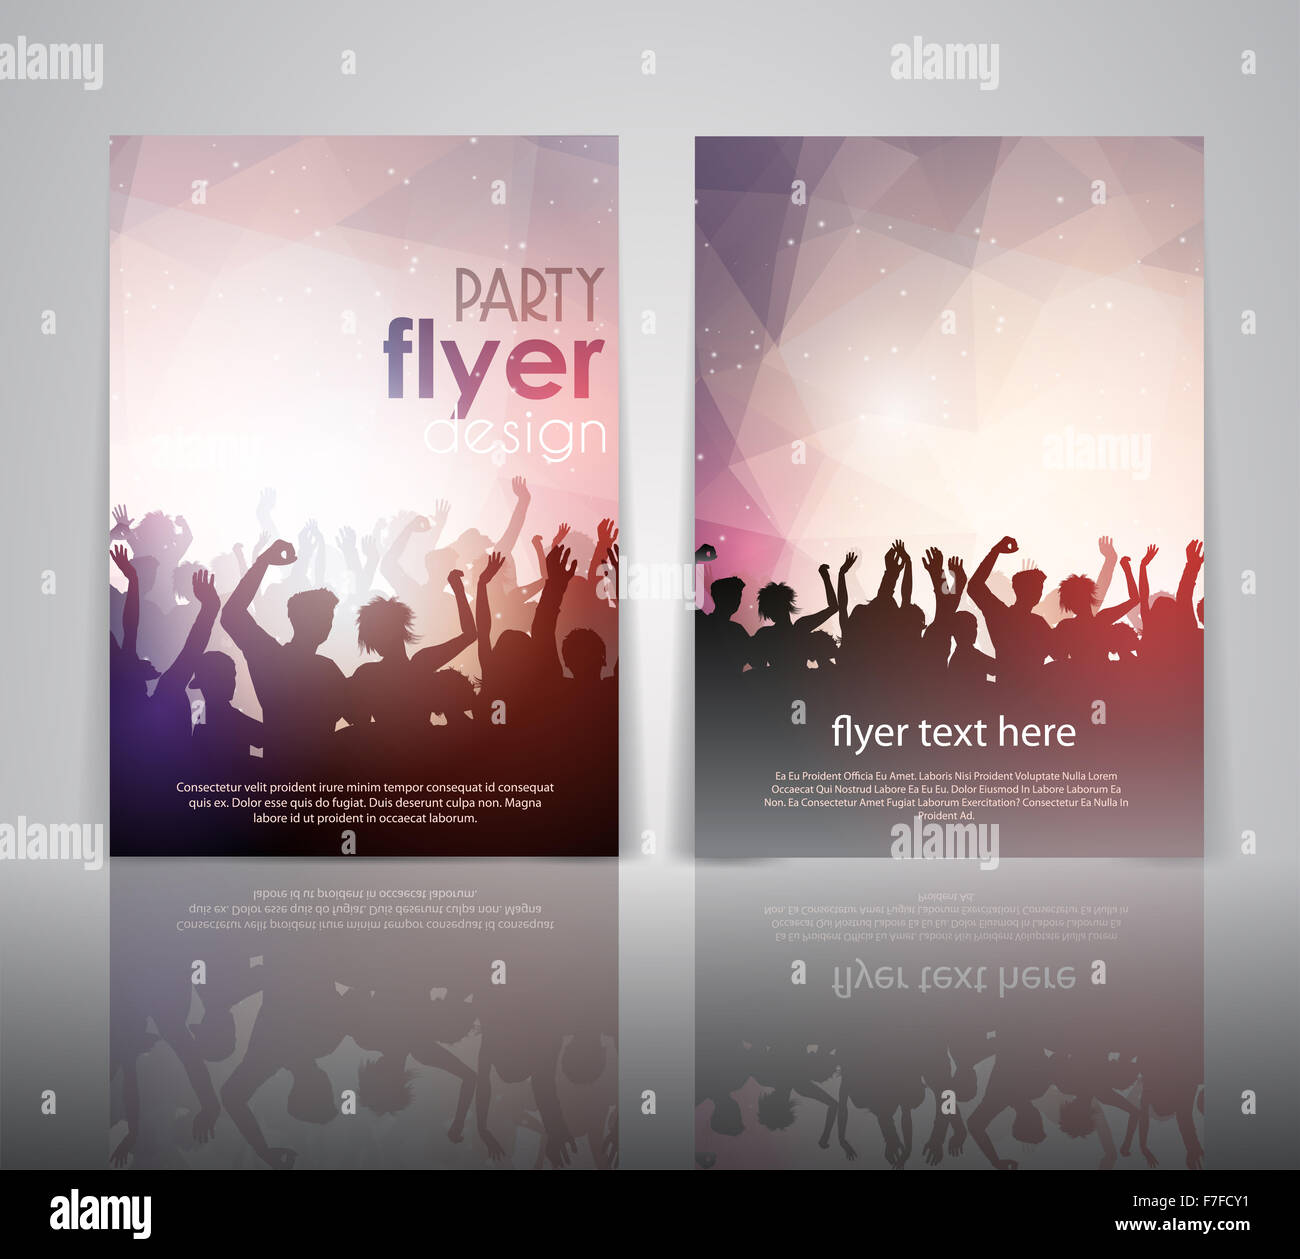 Party flyer design with silhouette of dancing crowd Stock Photo